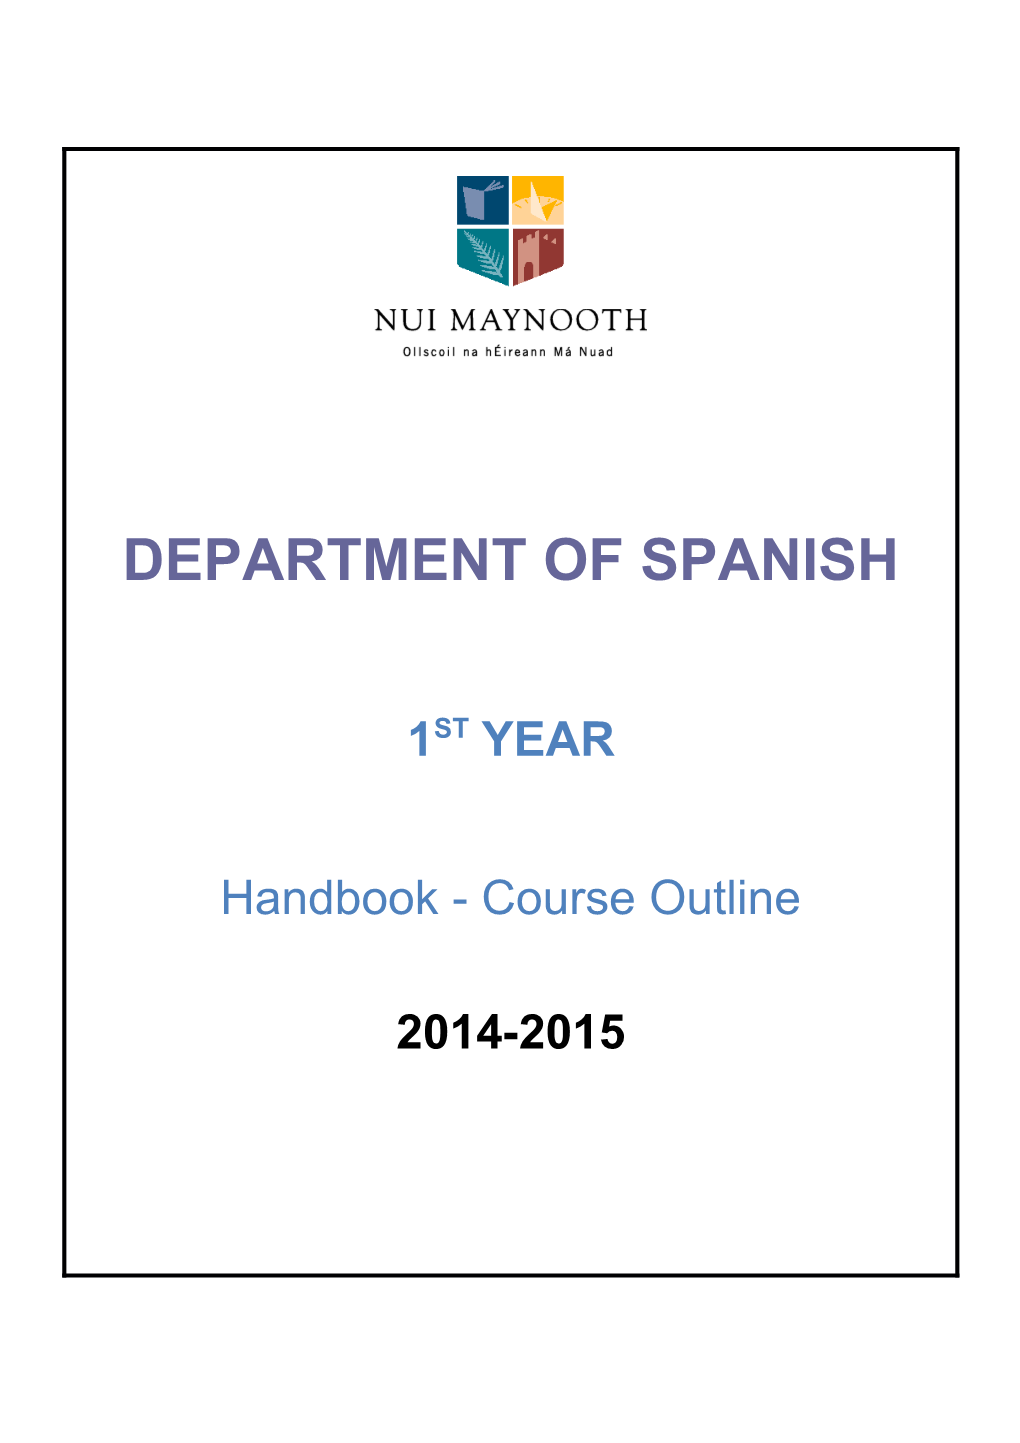 DEPARTMENT of SPANISH 1St Year Handbook - Course Outline 2014-2015